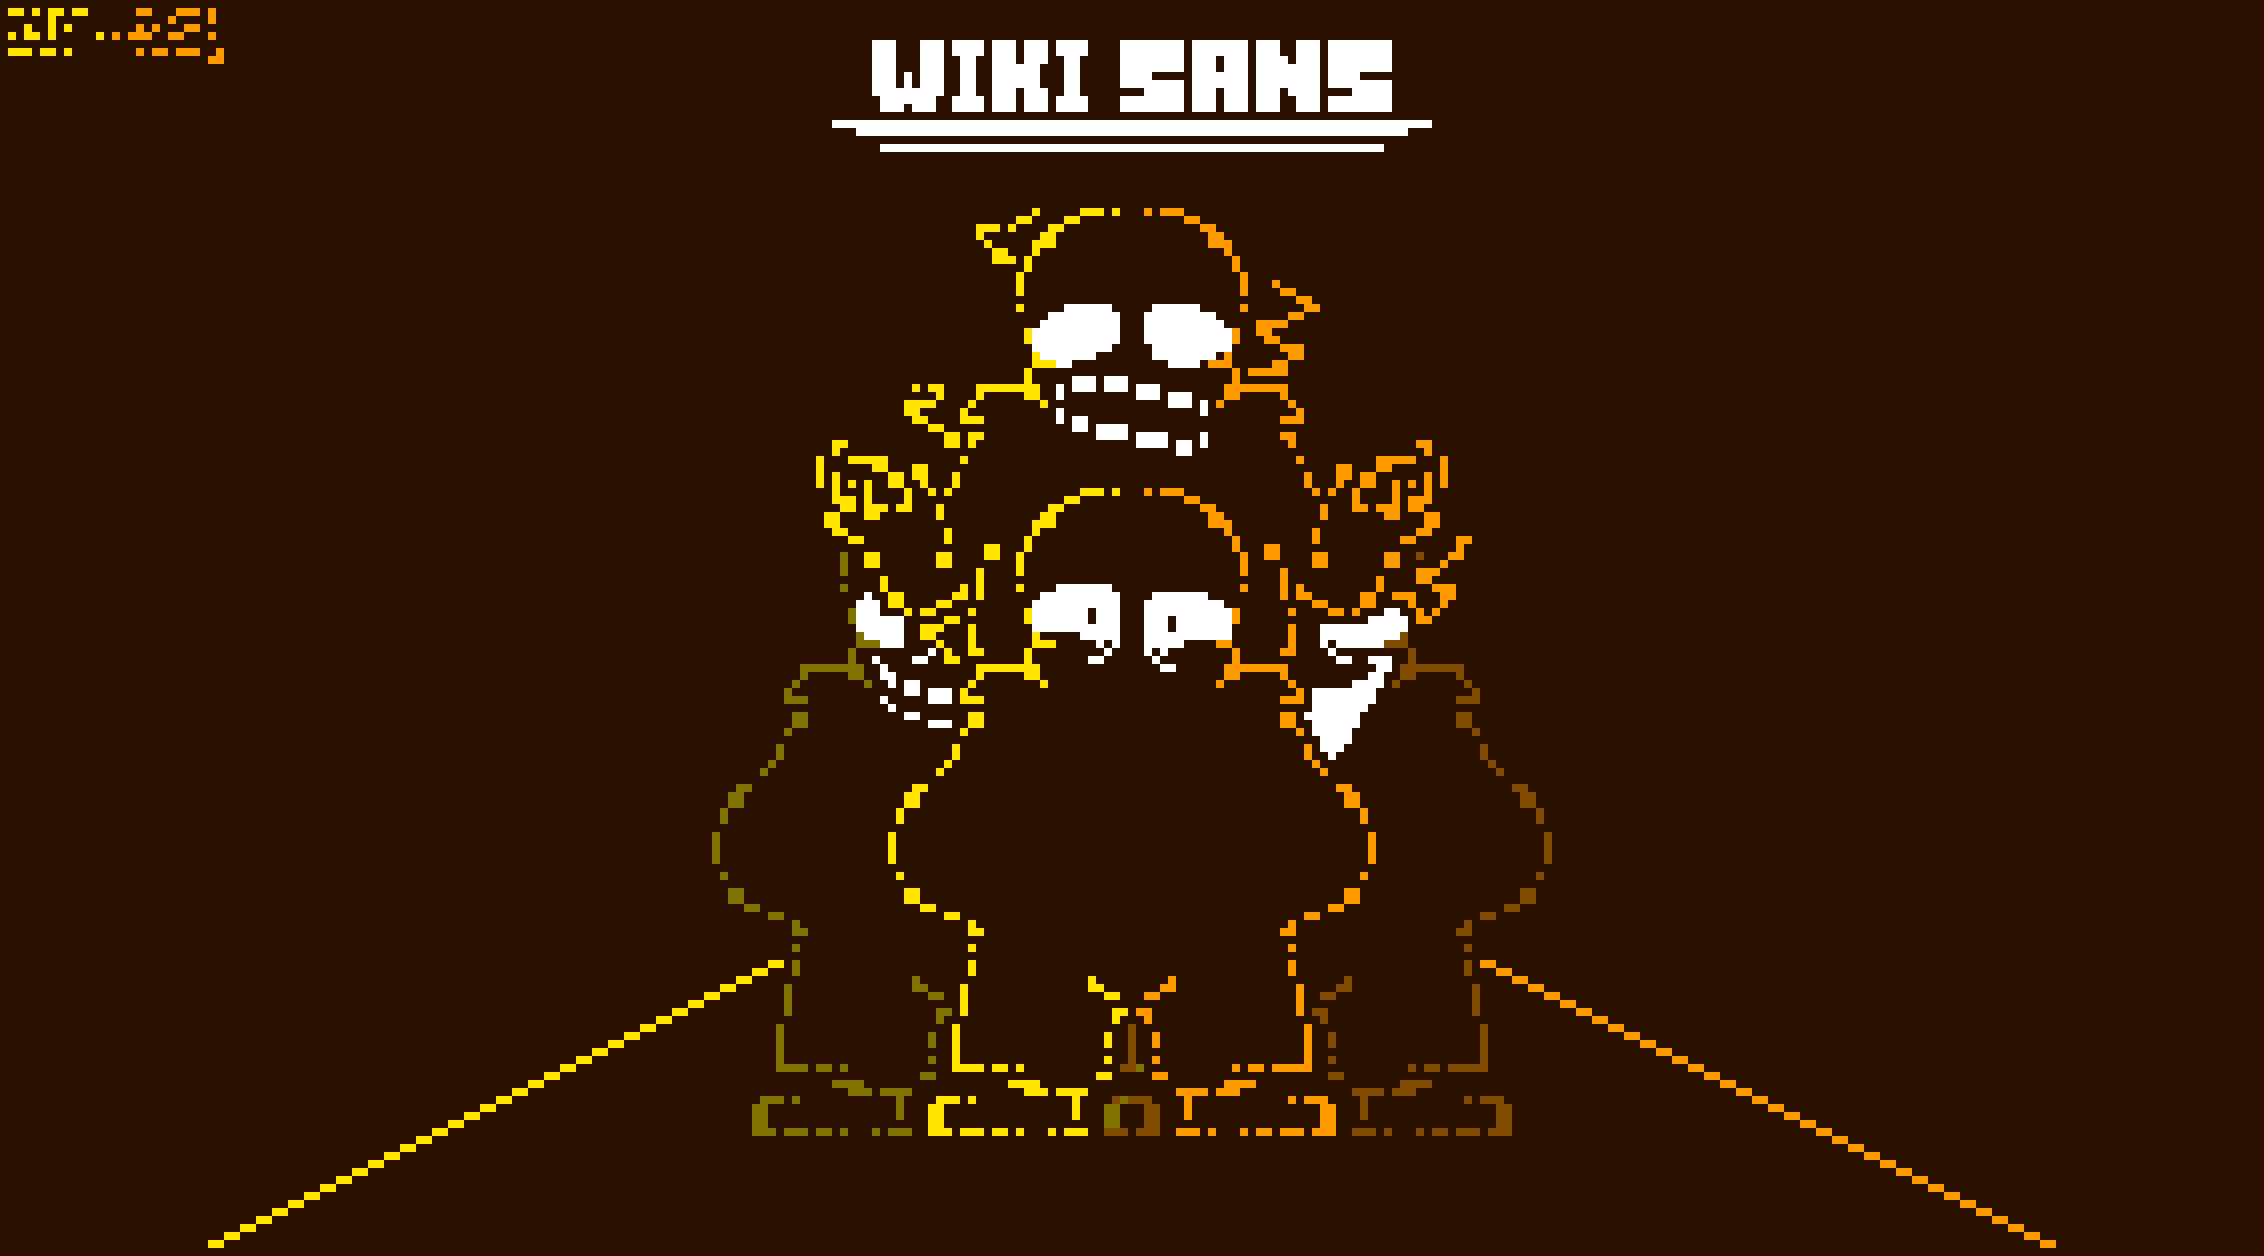 Discuss Everything About Undertale Wiki